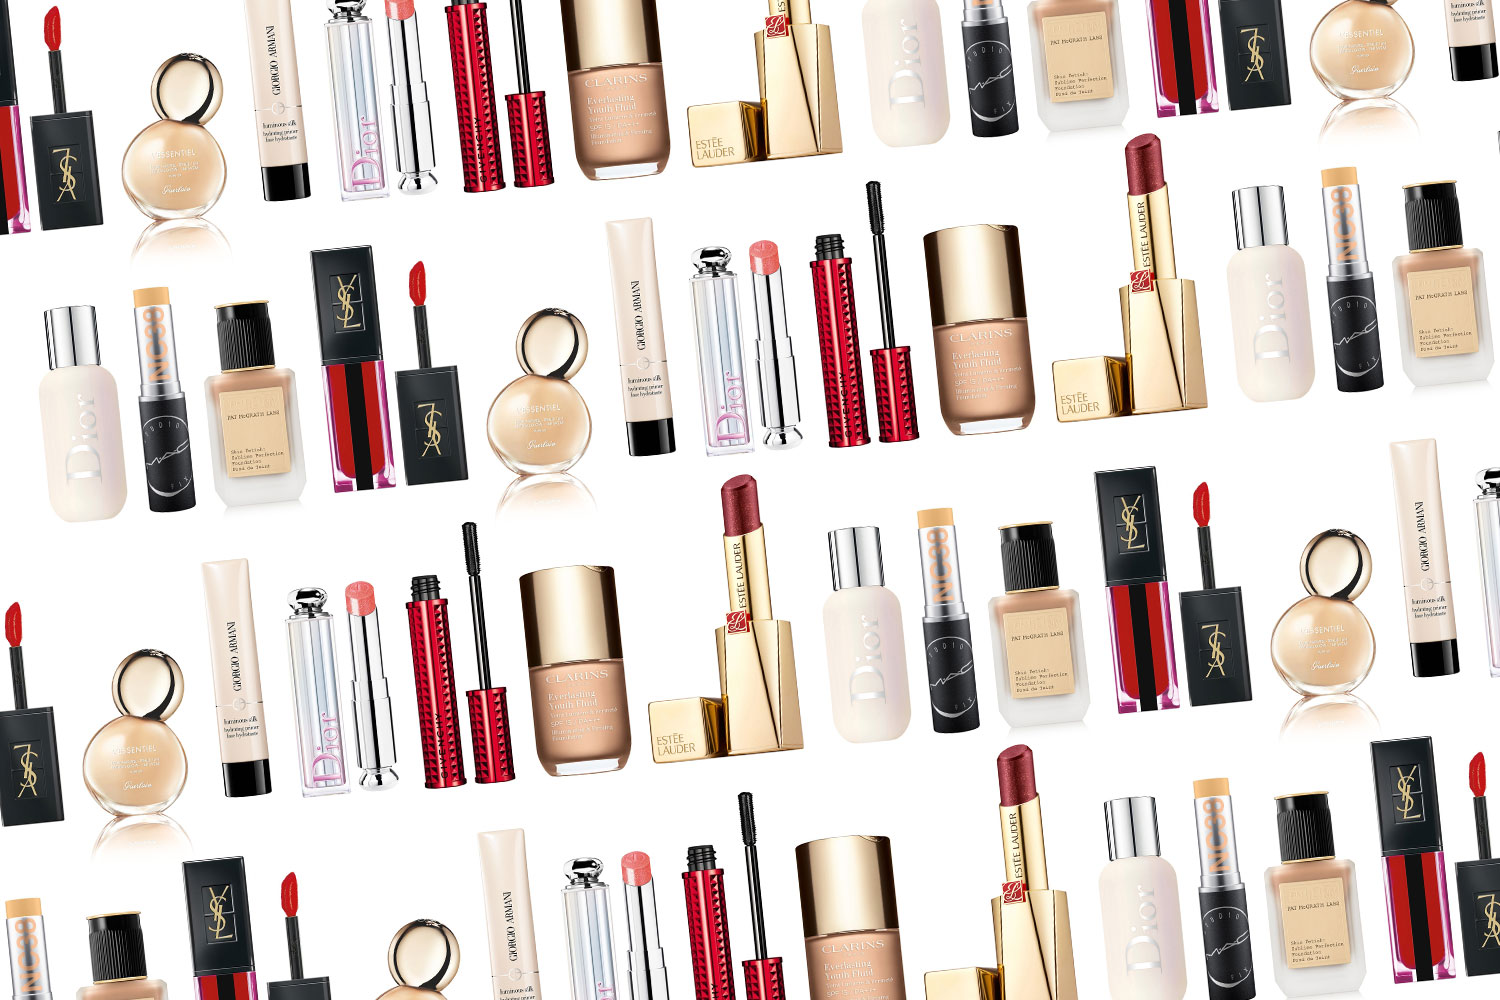 Our Beauty Experts Reveal The Best Luxury Makeup Products From 2019